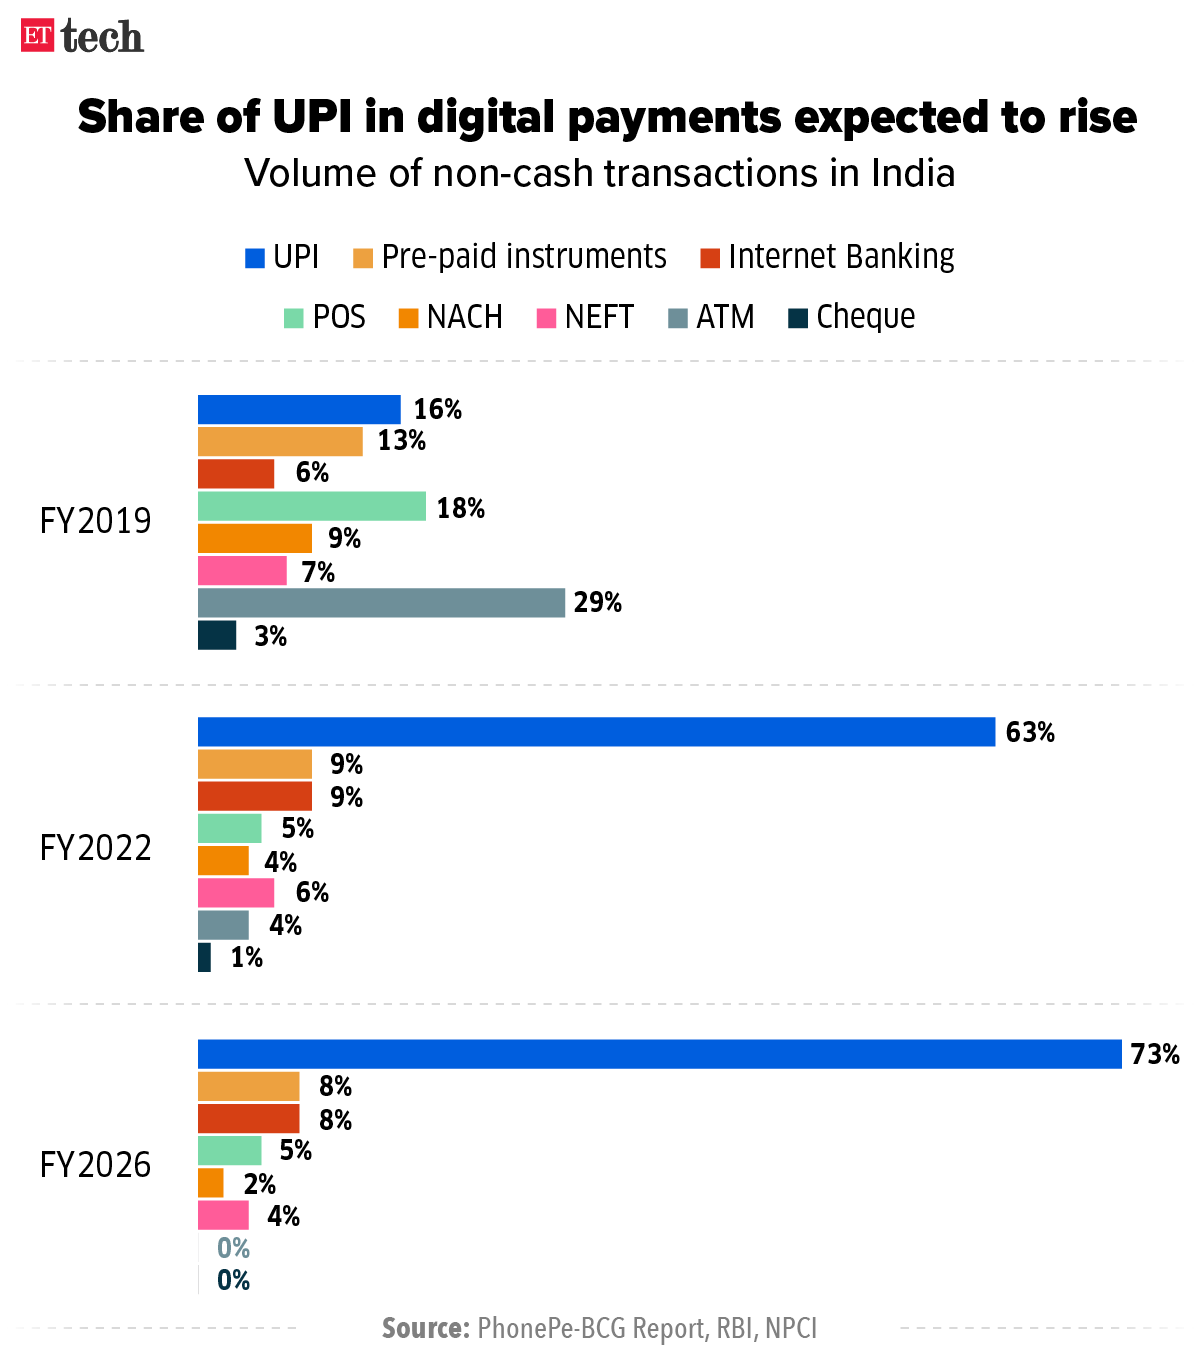 Share of UPI in digital payments expected to rise